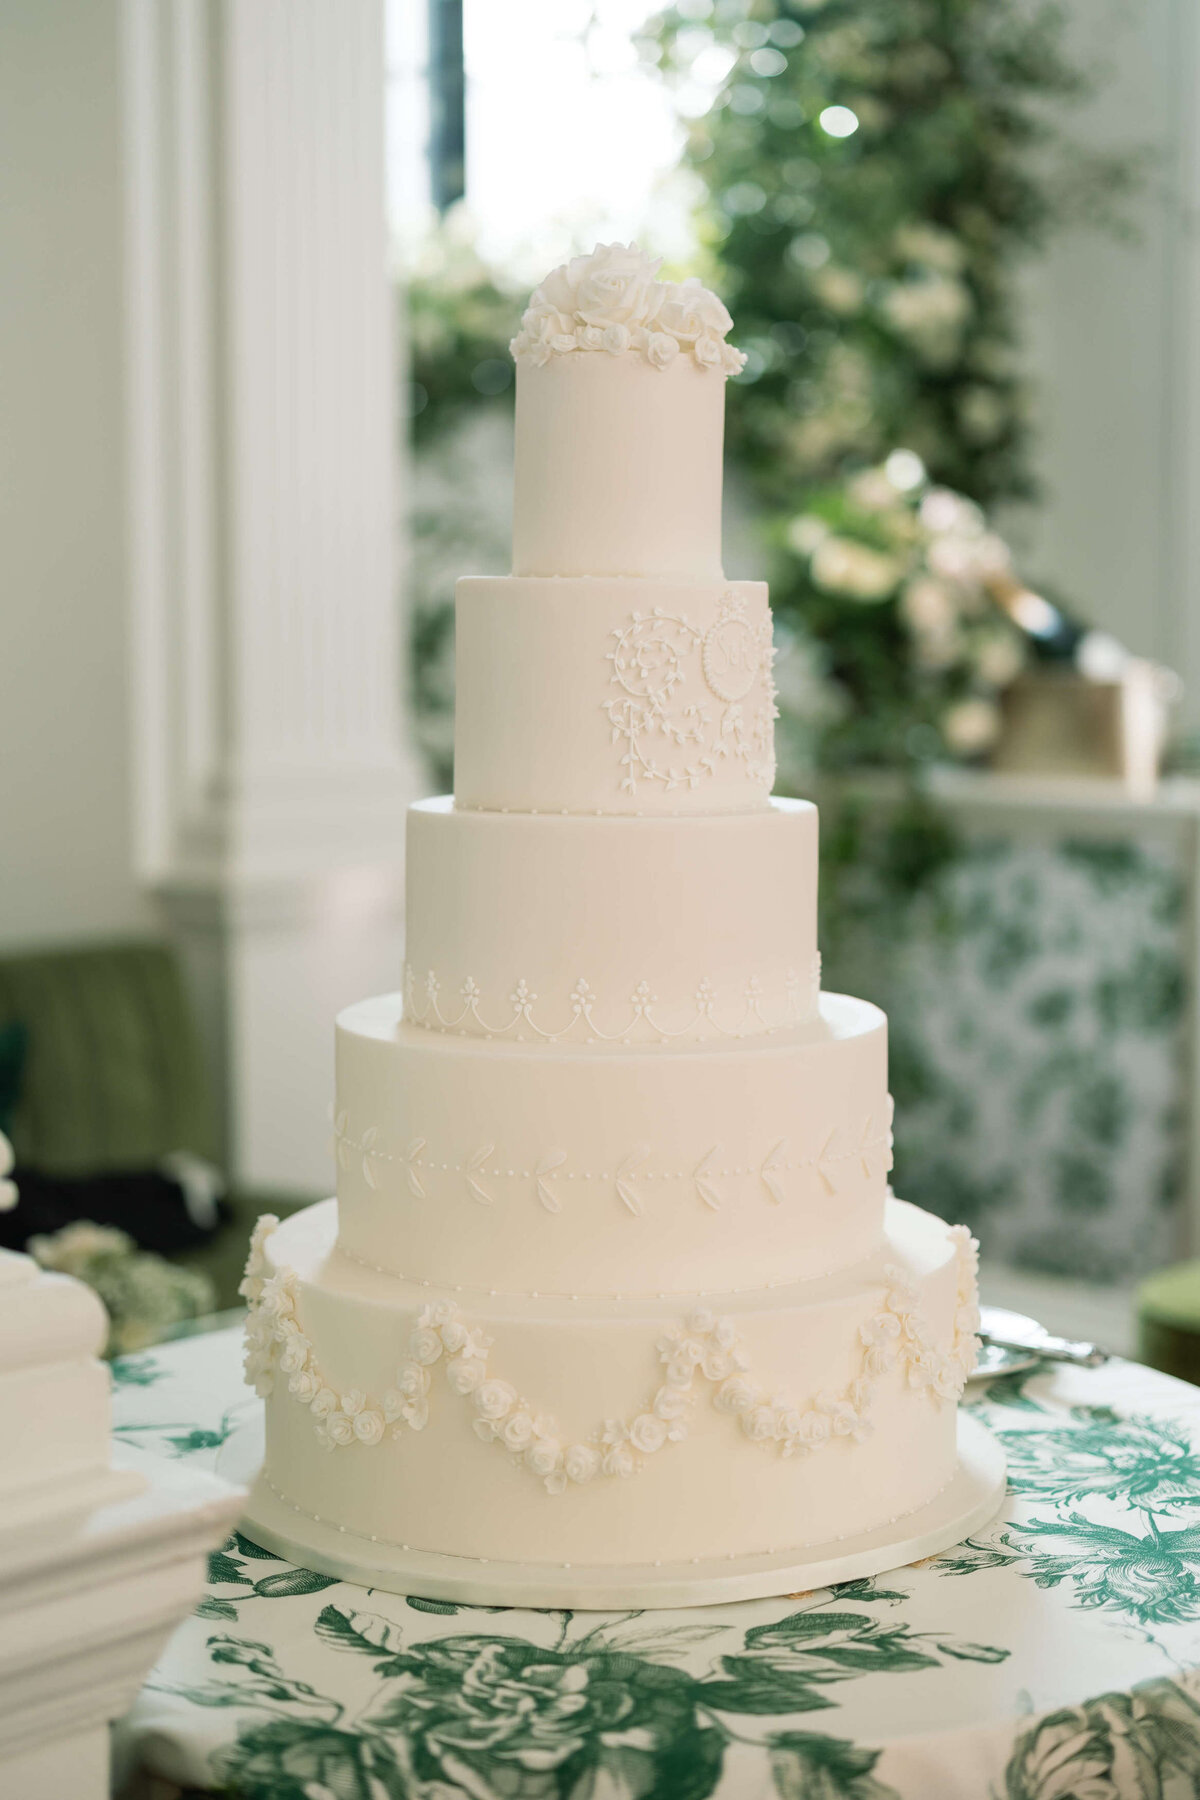 white five tier wedding cake with intricate piping decoration on a green and white patterned tablecloth with a matching bar behind it for a chic wedding